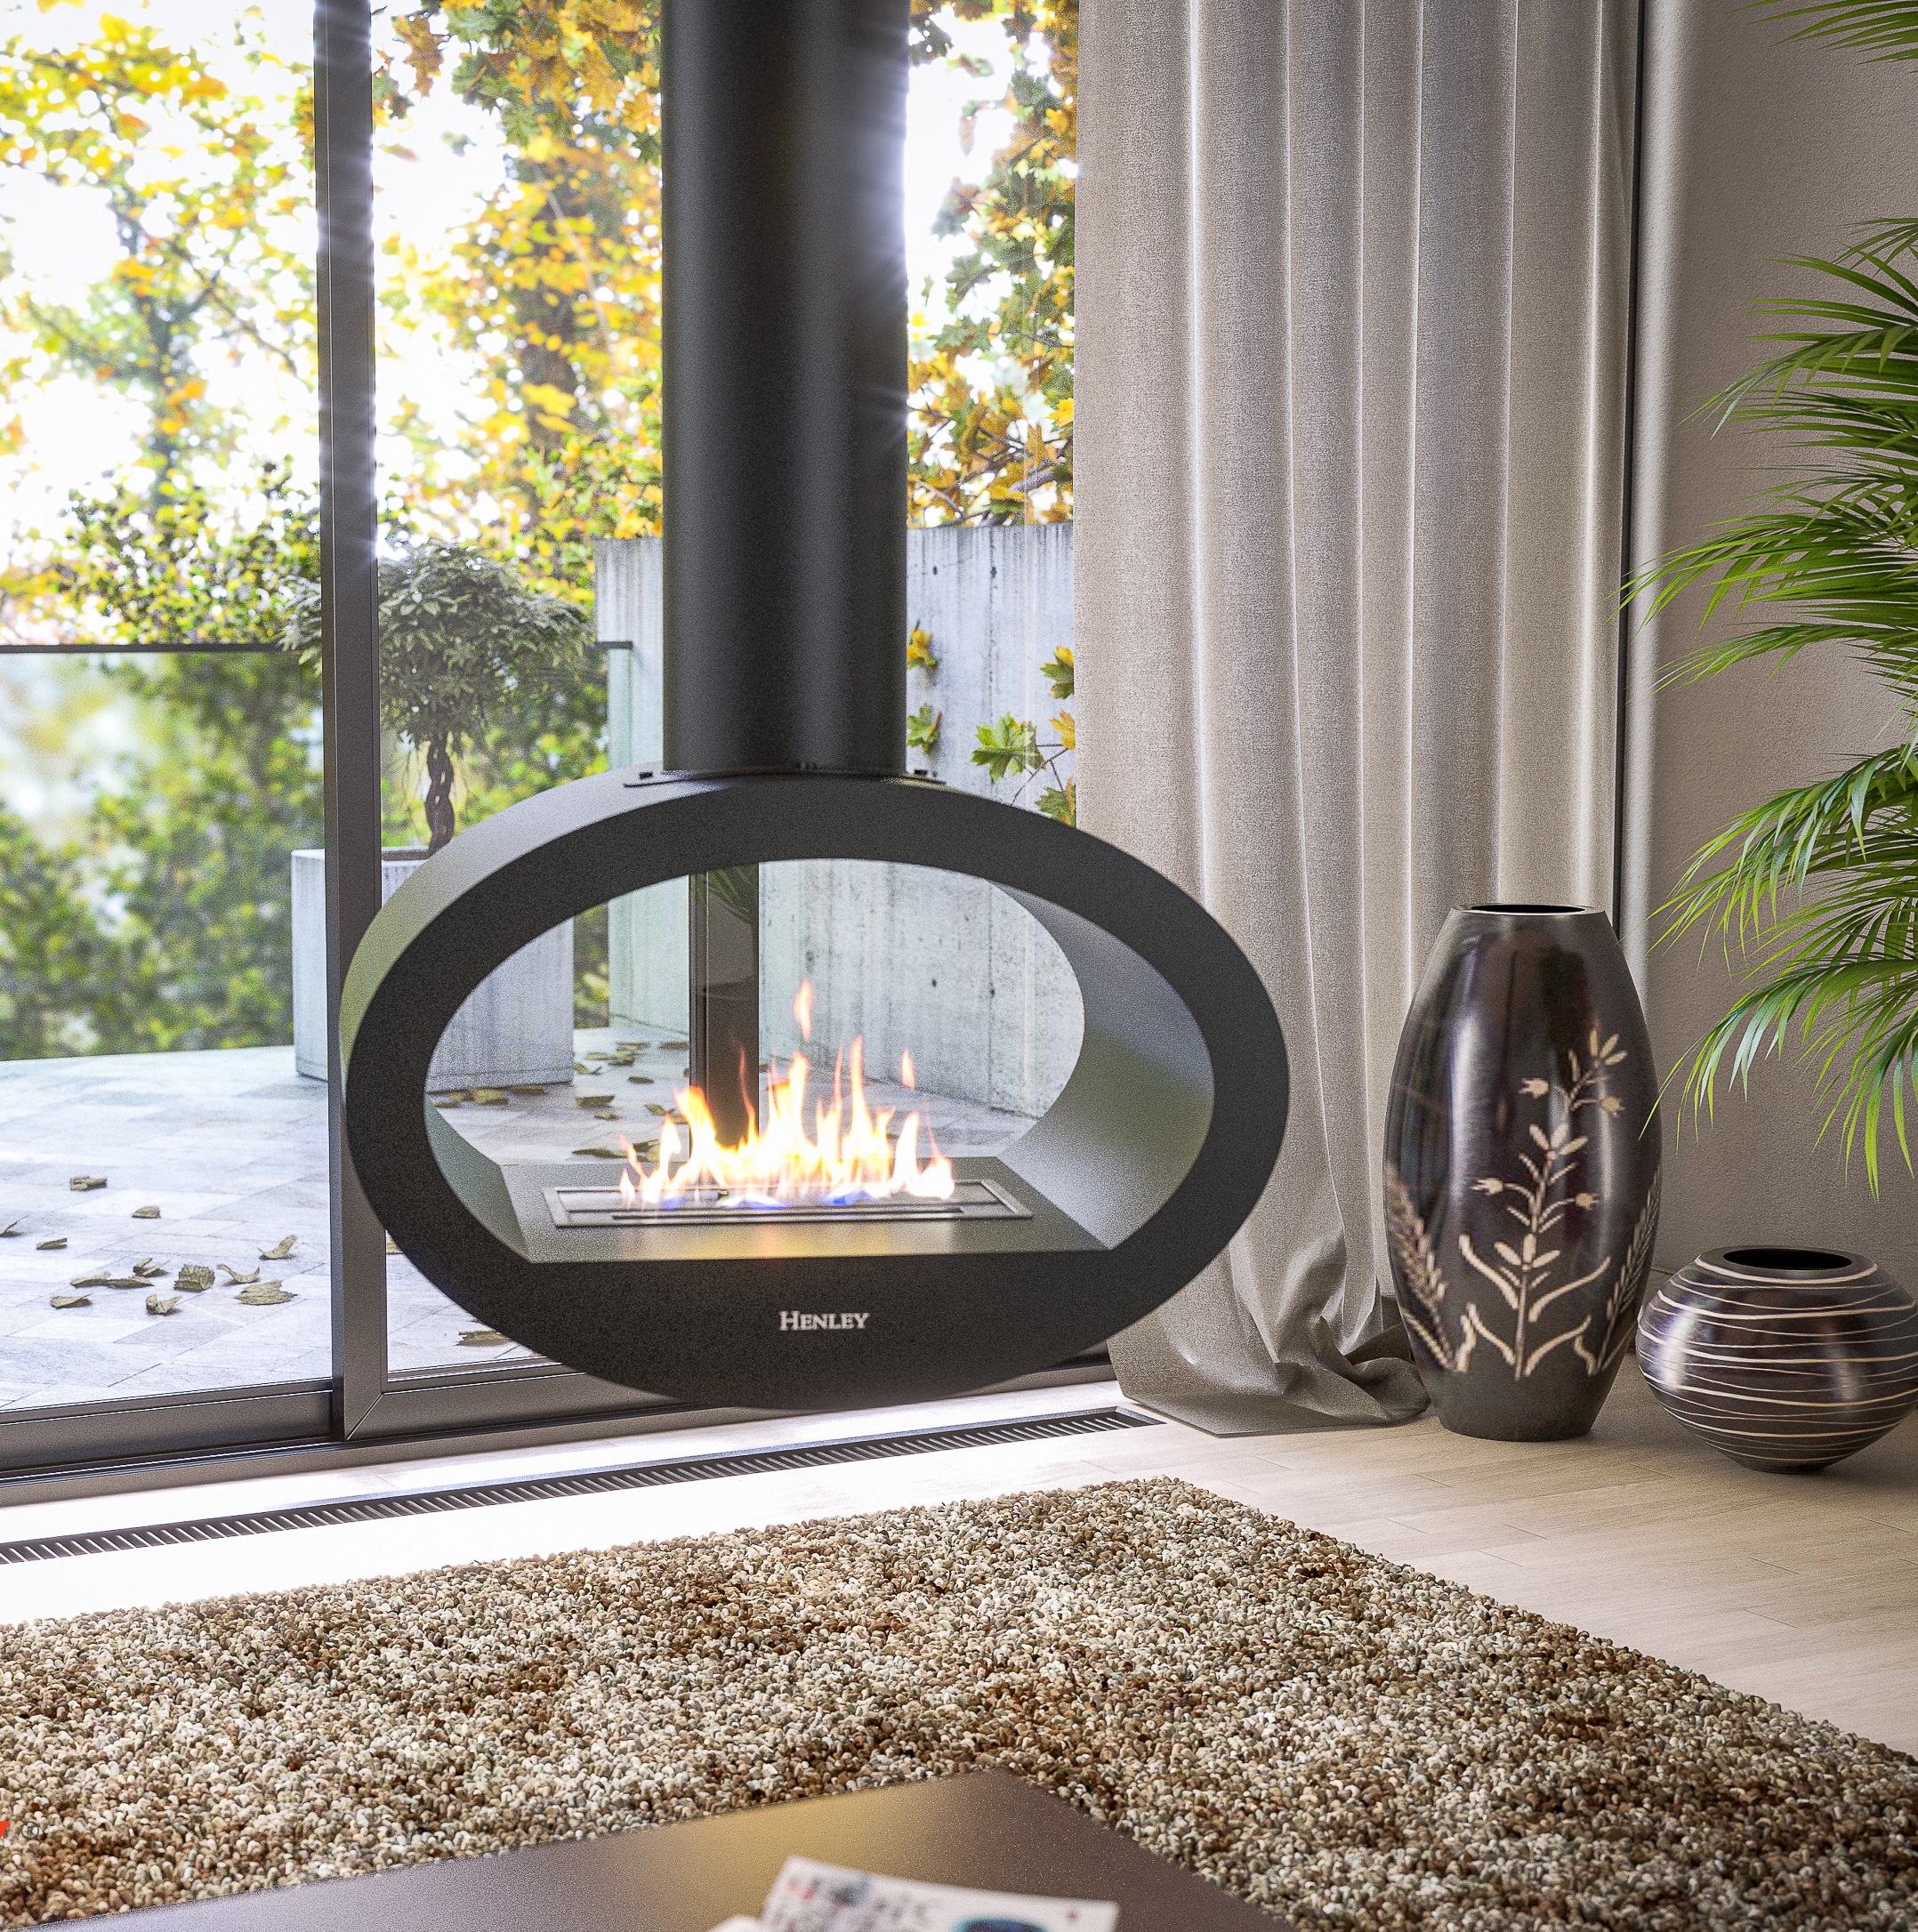 Milan Ceiling-Mounted Bio Fireplace – Graceful and Unique Design